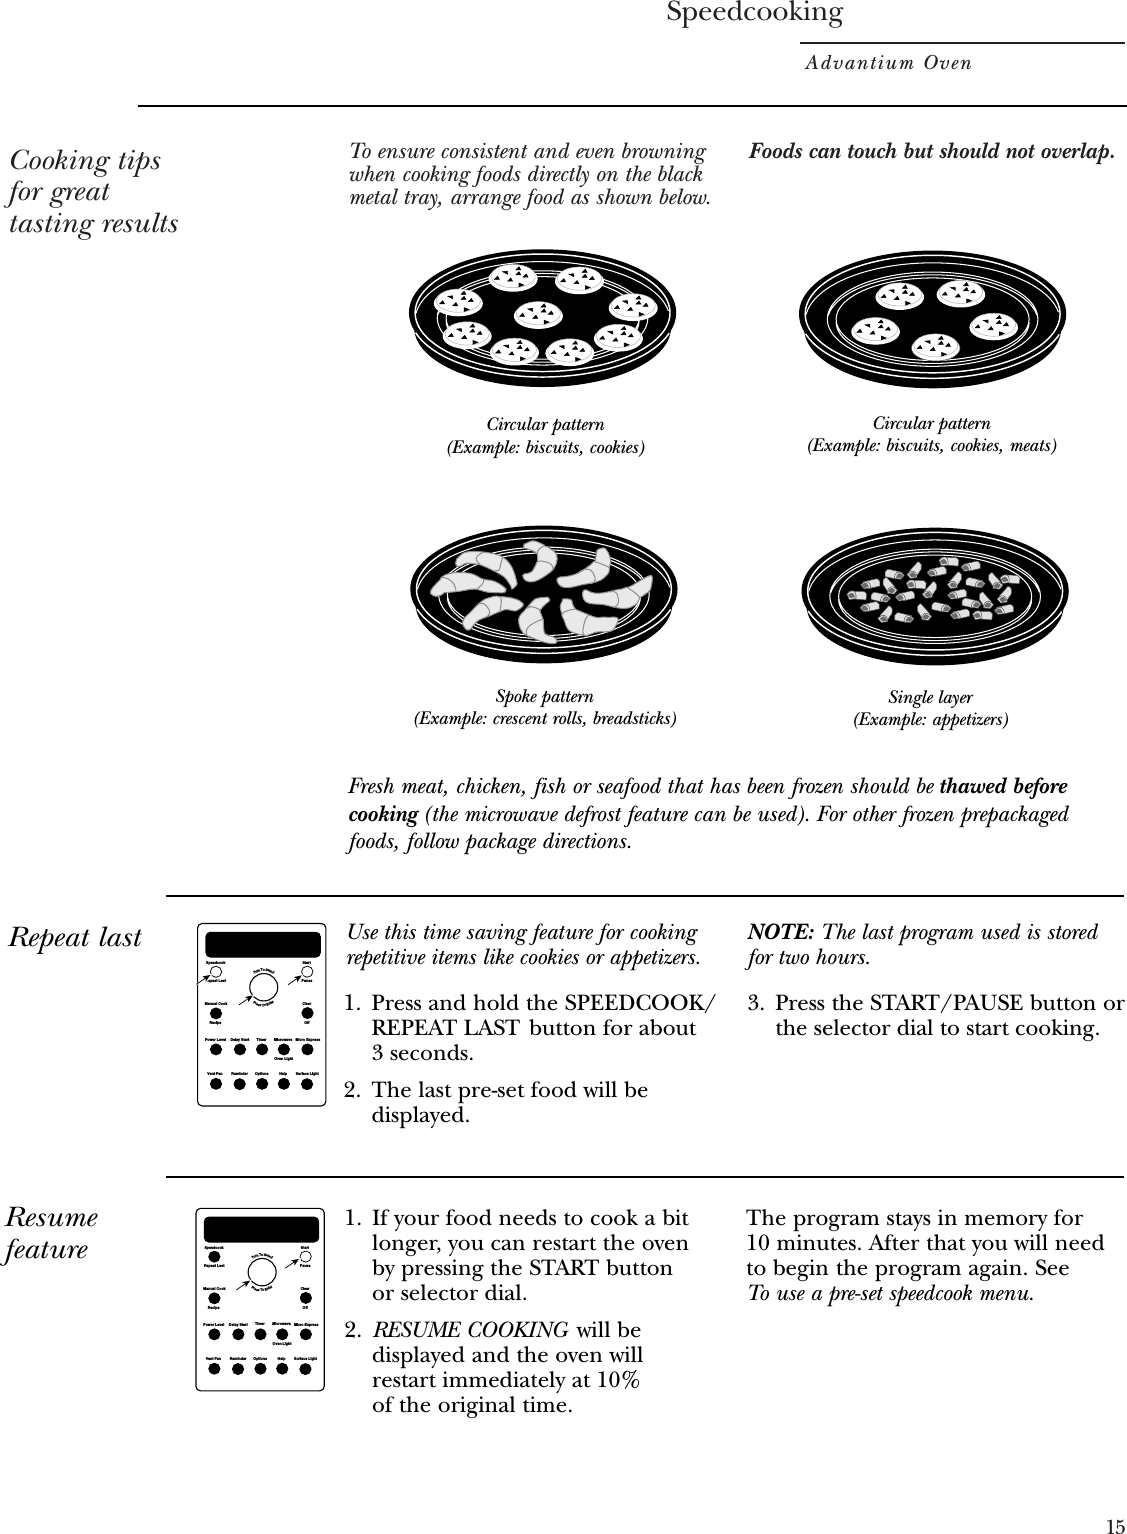 SpeedcookingAdvantium Oven15Cooking tipsfor greattasting resultsTo ensure consistent and even browningwhen cooking foods directly on the blackmetal tray, arrange food as shown below.Foods can touch but should not overlap.Circular pattern(Example: biscuits, cookies)Spoke pattern(Example: crescent rolls, breadsticks)Single layer(Example: appetizers)Circular pattern(Example: biscuits, cookies, meats)Repeat last1. Press and hold the SPEEDCOOK/REPEAT LAST button for about 3 seconds.2. The last pre-set food will bedisplayed.3. Press the START/PAUSE button orthe selector dial to start cooking.Repeat LastRecipeSpeedcookManual CookPower Level Micro ExpressMicrowaveTimerDelay StartVent Fan Surface LightHelpOptionsReminderClearOffStartPauseOven LightTurnToSelectPressToEnterUse this time saving feature for cookingrepetitive items like cookies or appetizers.NOTE: The last program used is storedfor two hours.Resumefeature1. If your food needs to cook a bitlonger, you can restart the oven by pressing the START button or selector dial.2. RESUME COOKING will bedisplayed and the oven will restart immediately at 10% of the original time.The program stays in memory for 10 minutes. After that you will needto begin the program again. See To use a pre-set speedcook menu.Repeat LastRecipeSpeedcookManual CookPower Level Micro ExpressMicrowaveTimerDelay StartVent Fan Surface LightHelpOptionsReminderClearOffStartPauseOven LightTurnToSelectPressToEnterFresh meat, chicken, fish or seafood that has been frozen should be thawed beforecooking (the microwave defrost feature can be used). For other frozen prepackagedfoods, follow package directions.